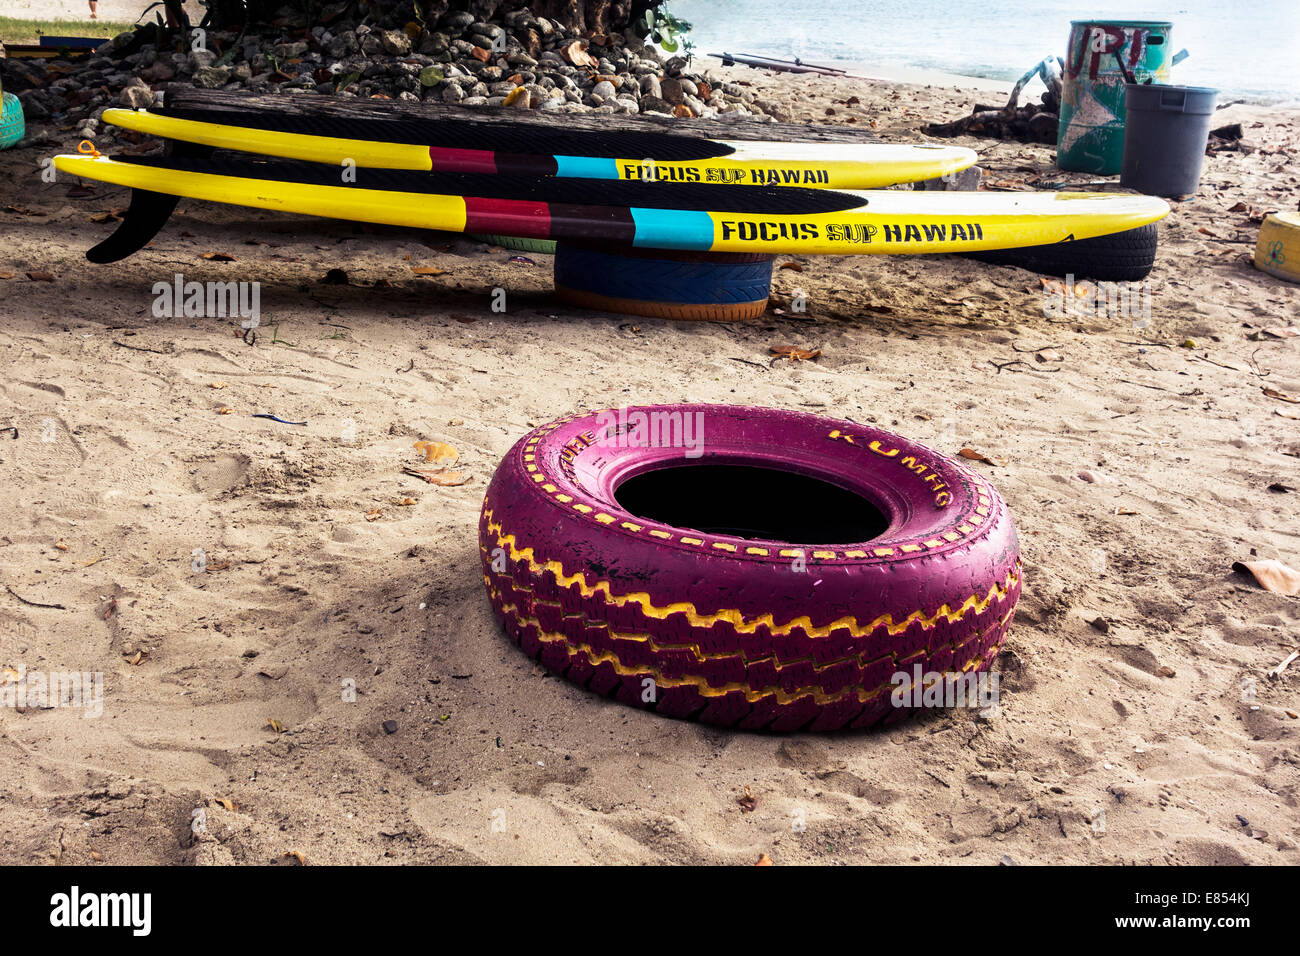 Two stand up paddle boards rest on painted tires, while an empty colorful tire in foreground, near the Caribbean sea. St. Croix. Stock Photo